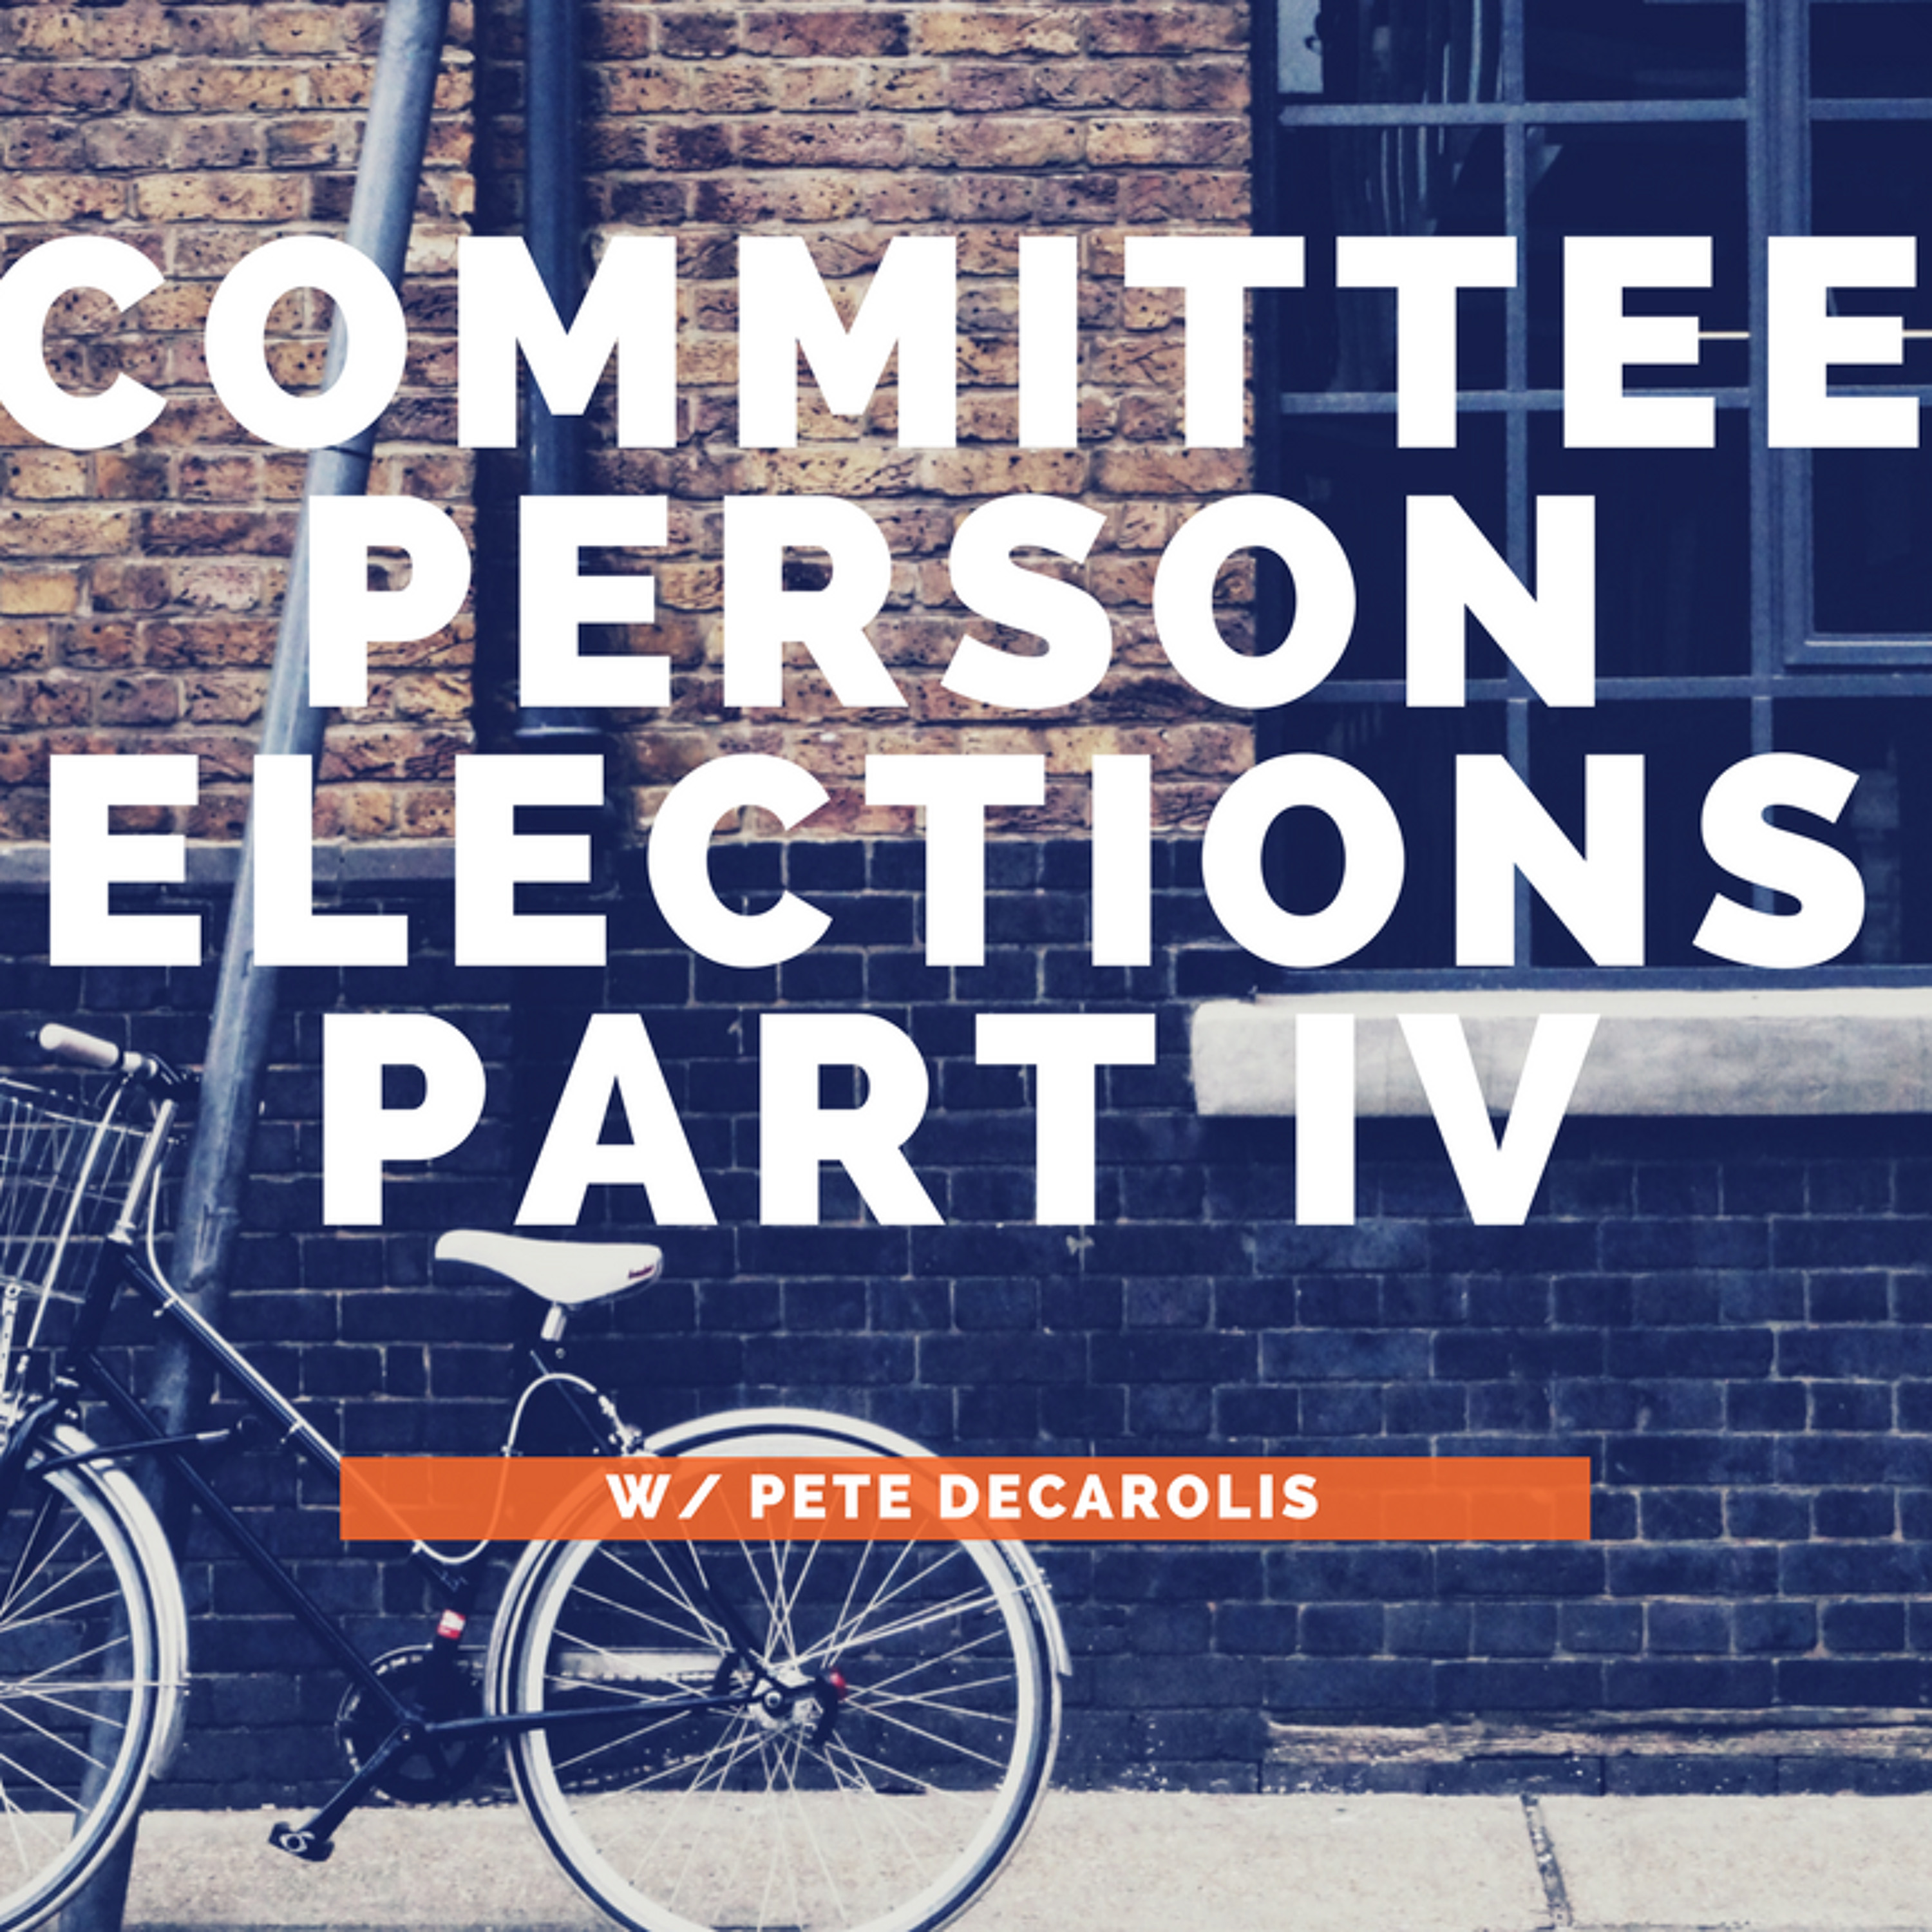 Committeeperson Elections Part IV w/Pete Decarolis